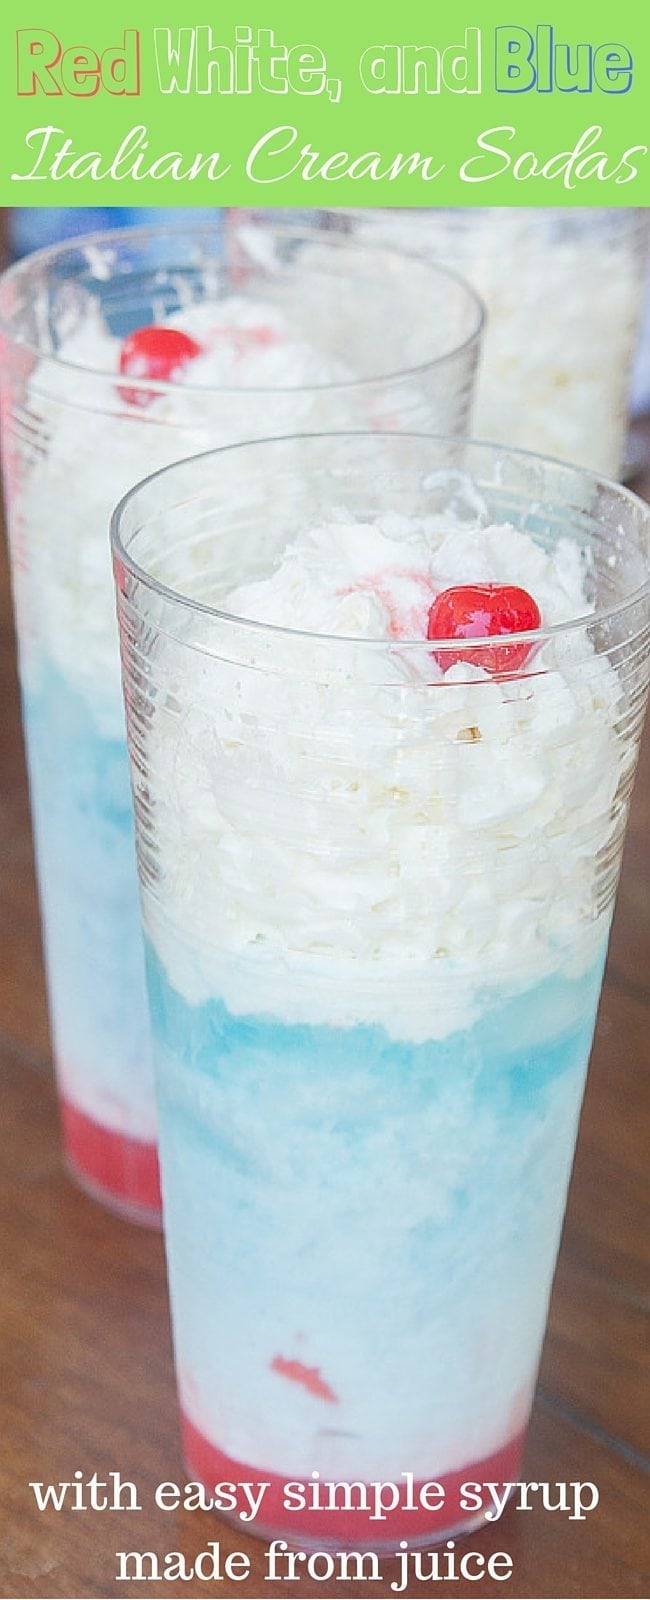 Easy Italian Cream Sodas with homemade simple syrup. Make them red, white and blue for a family friendly Fourth of July beverage. 